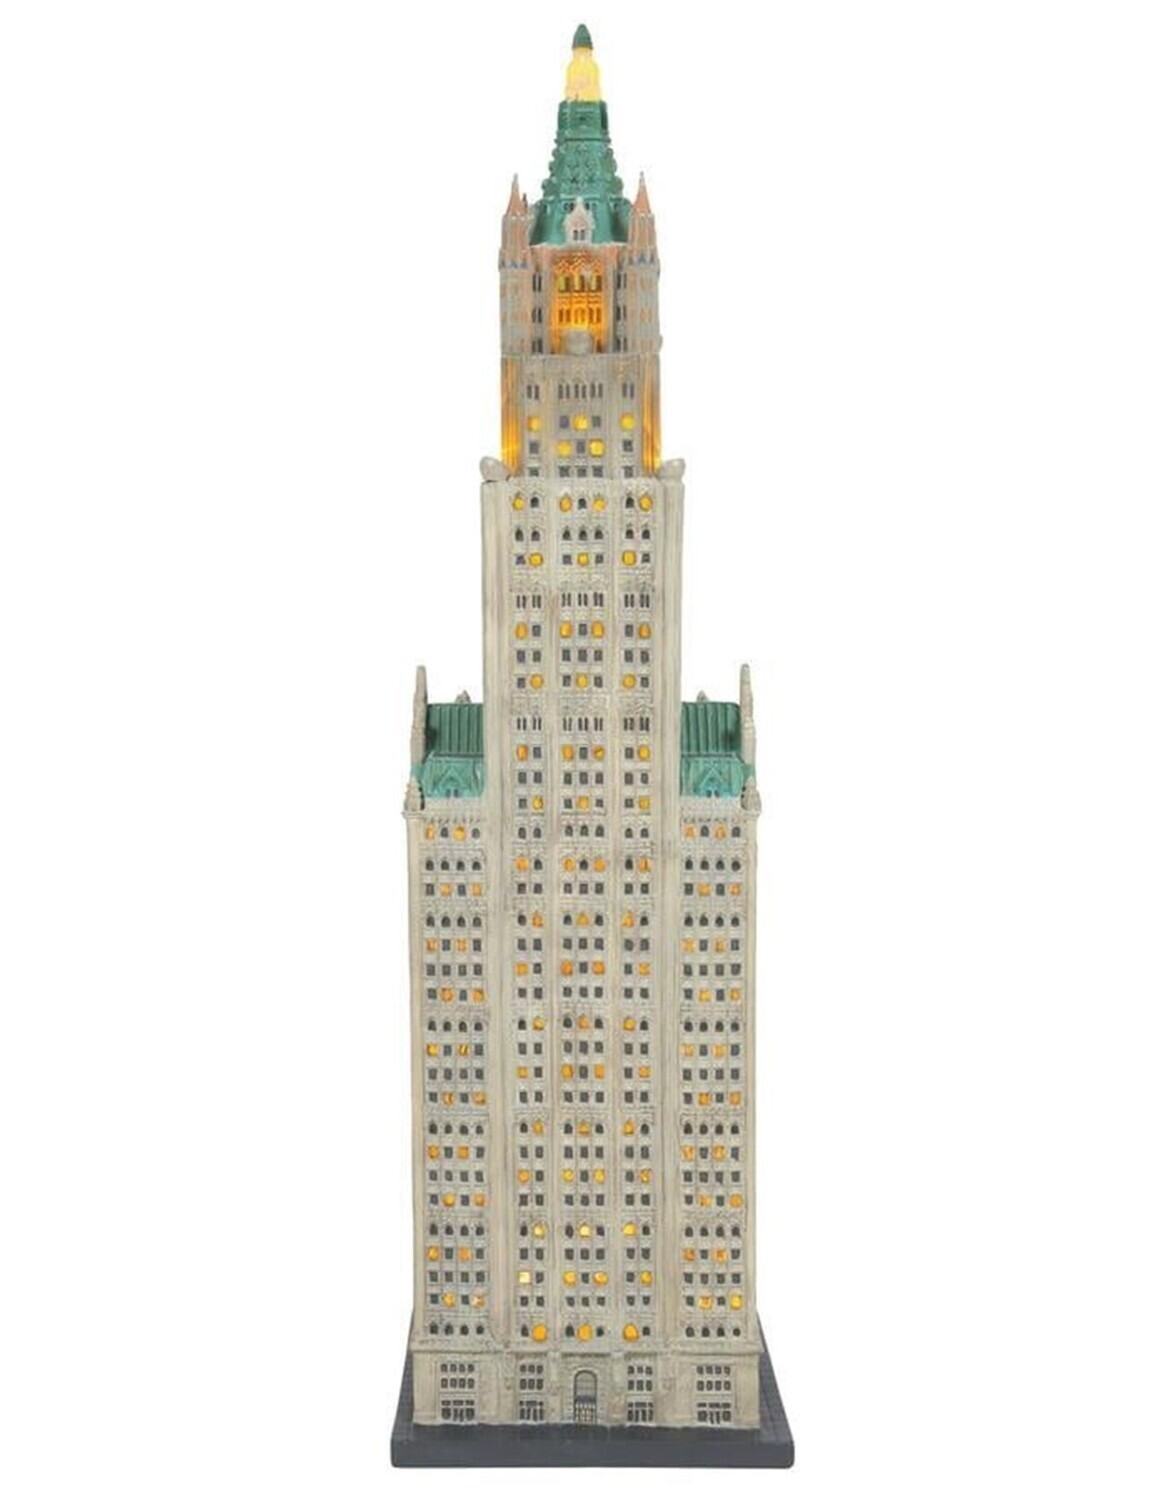 Department 56 Christmas in the City Village: The Woolworth Building "Breaking News" 19" H (6007584)